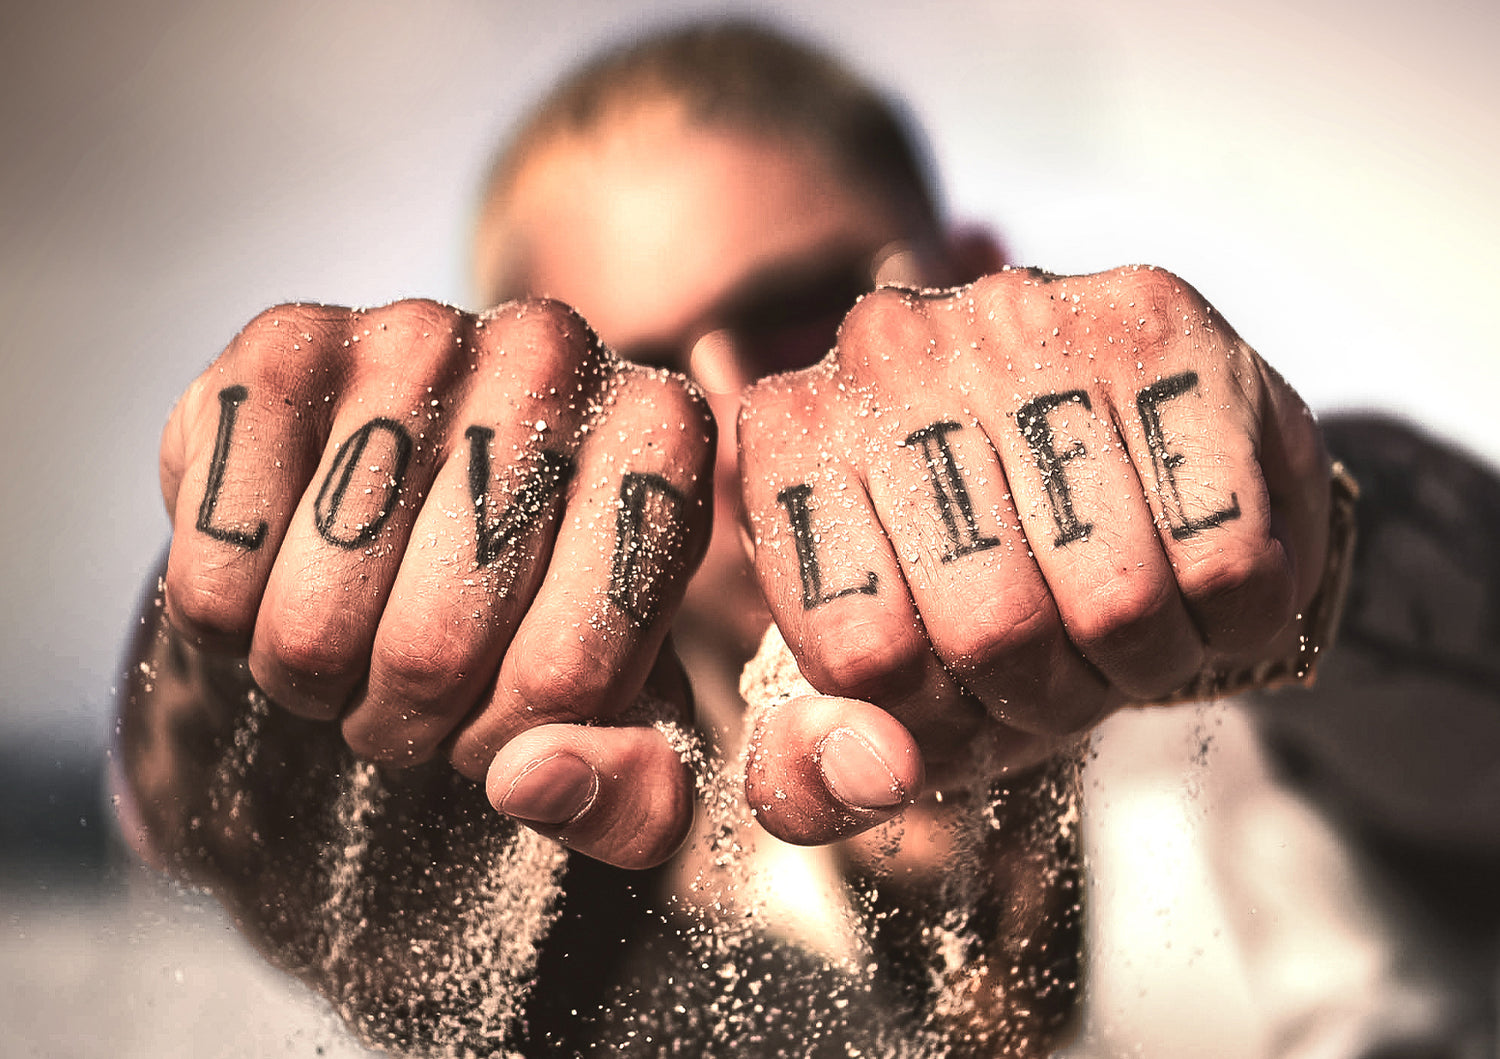 LOVE LIFE tattoo by Justin Love for luxury streetwear brand The Hideout Clothing